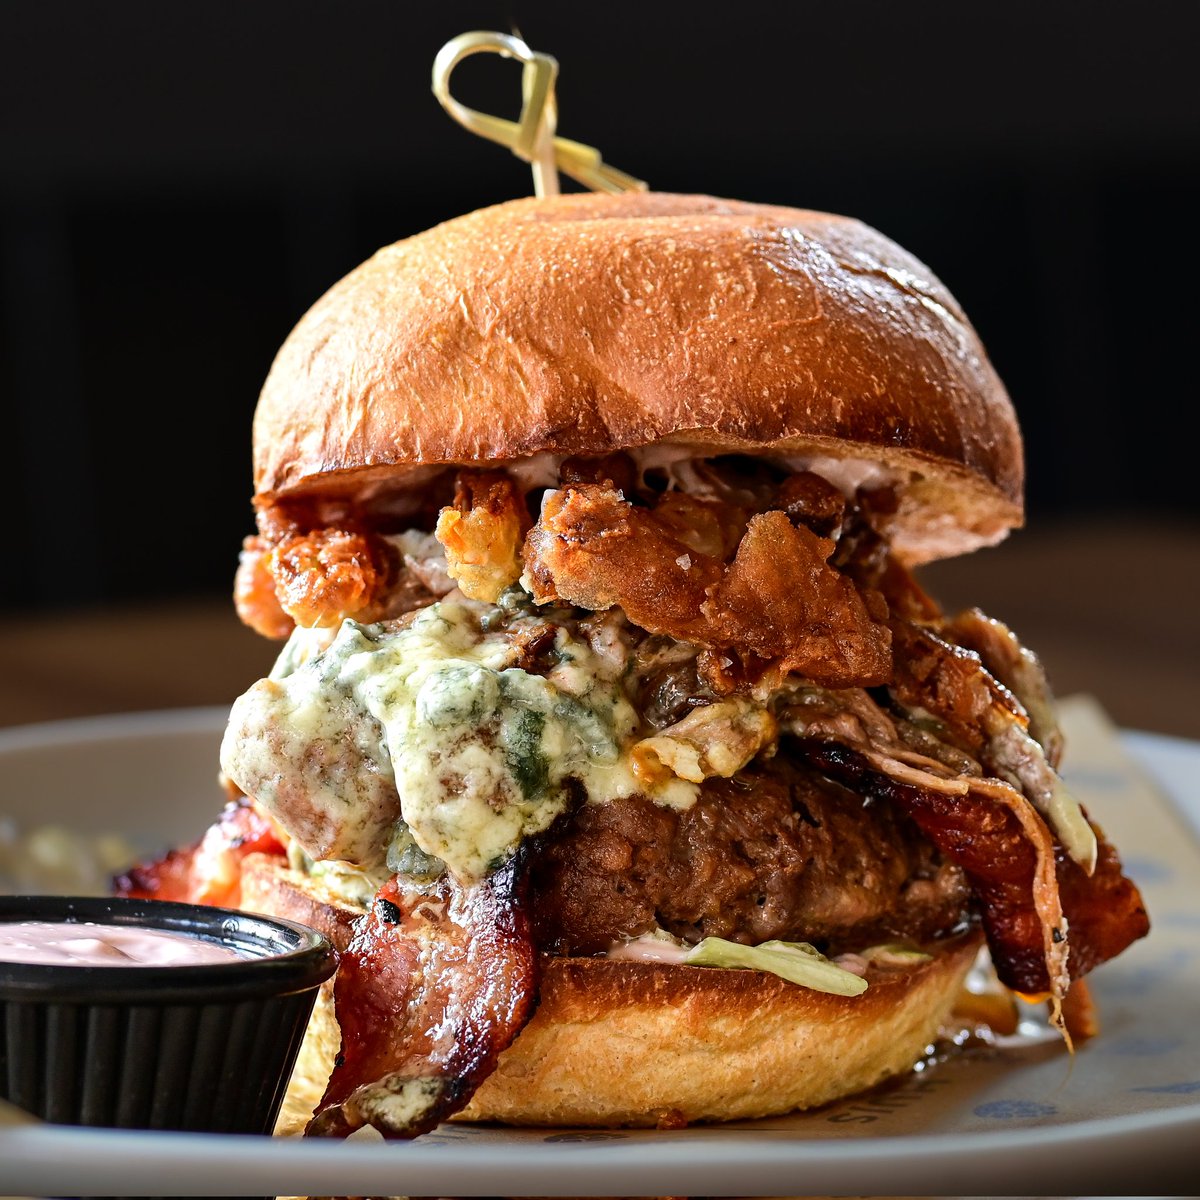 🍔 NEW SPECIAL! 🍔

GOOD BURGER Handmade beef patty, topped with 3 herb rubbed pulled pork, treacle candied bacon, blue cheese, shredded lettuce, onion straws & cherry mayo 

#restaurant #belgianbeer #craftbeer #hampshire #portsmouth #southsea #huissouthsea